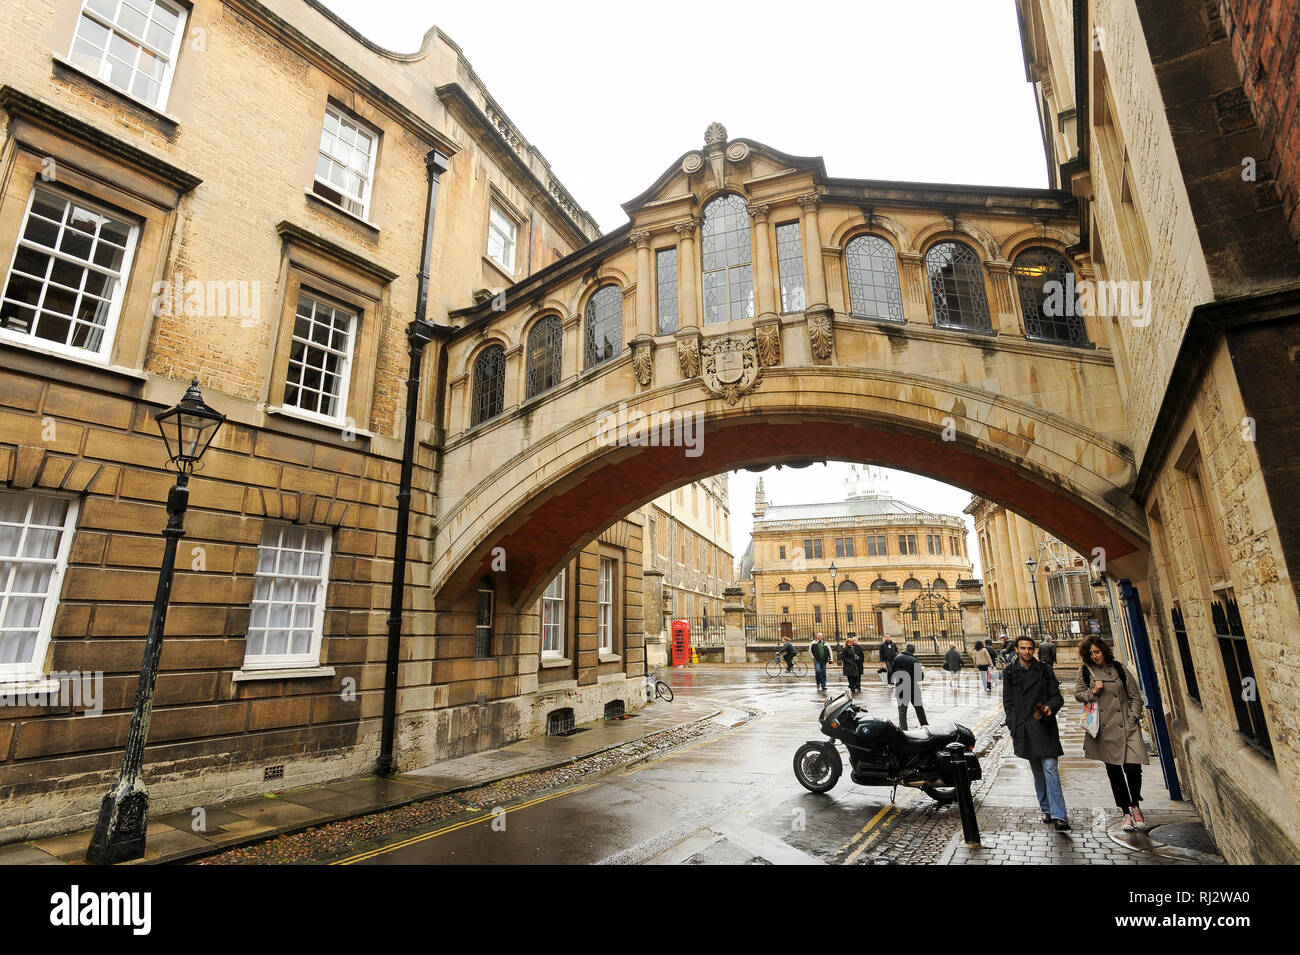 Bridge of Sighs (Hertford Bridge) over New College Lane, Hertford College, University of Oxford one of the oldest universities in the world. Historic  Stock Photo